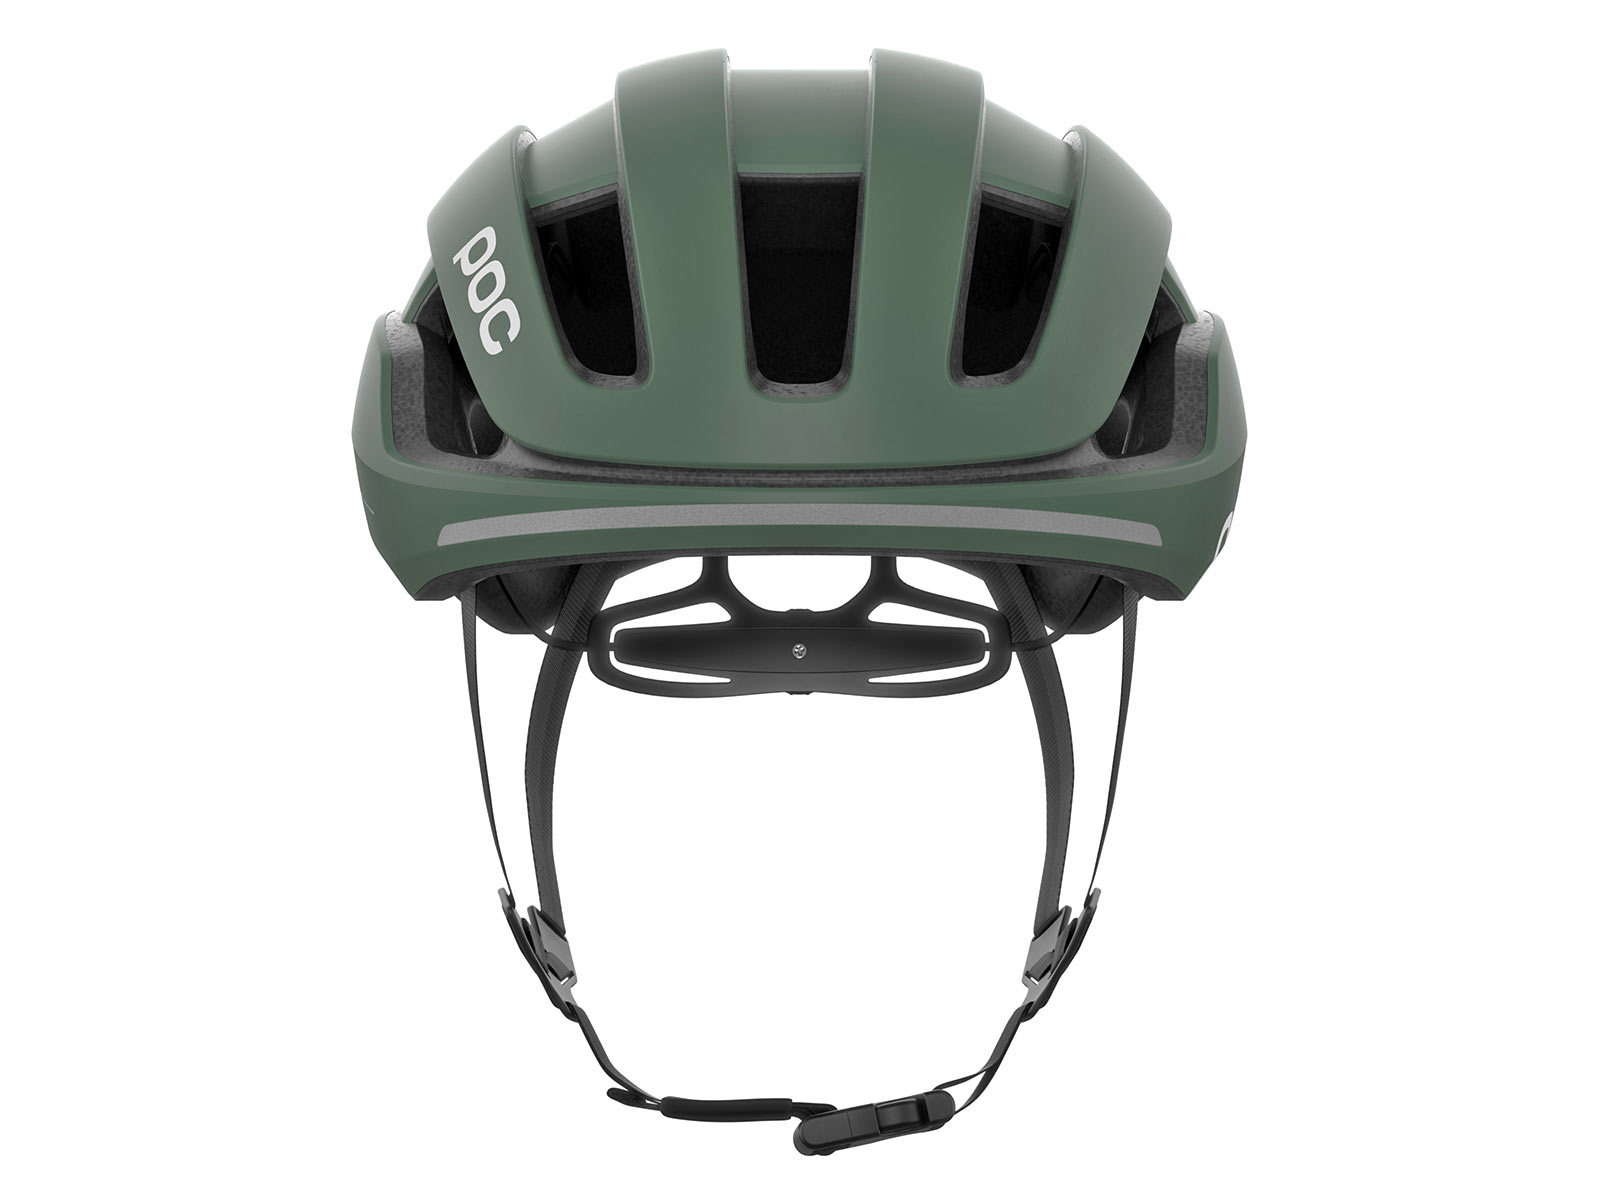 POC-Omne-Beacon-helmet-with-integrated-LED-taillight_green-front.jpg